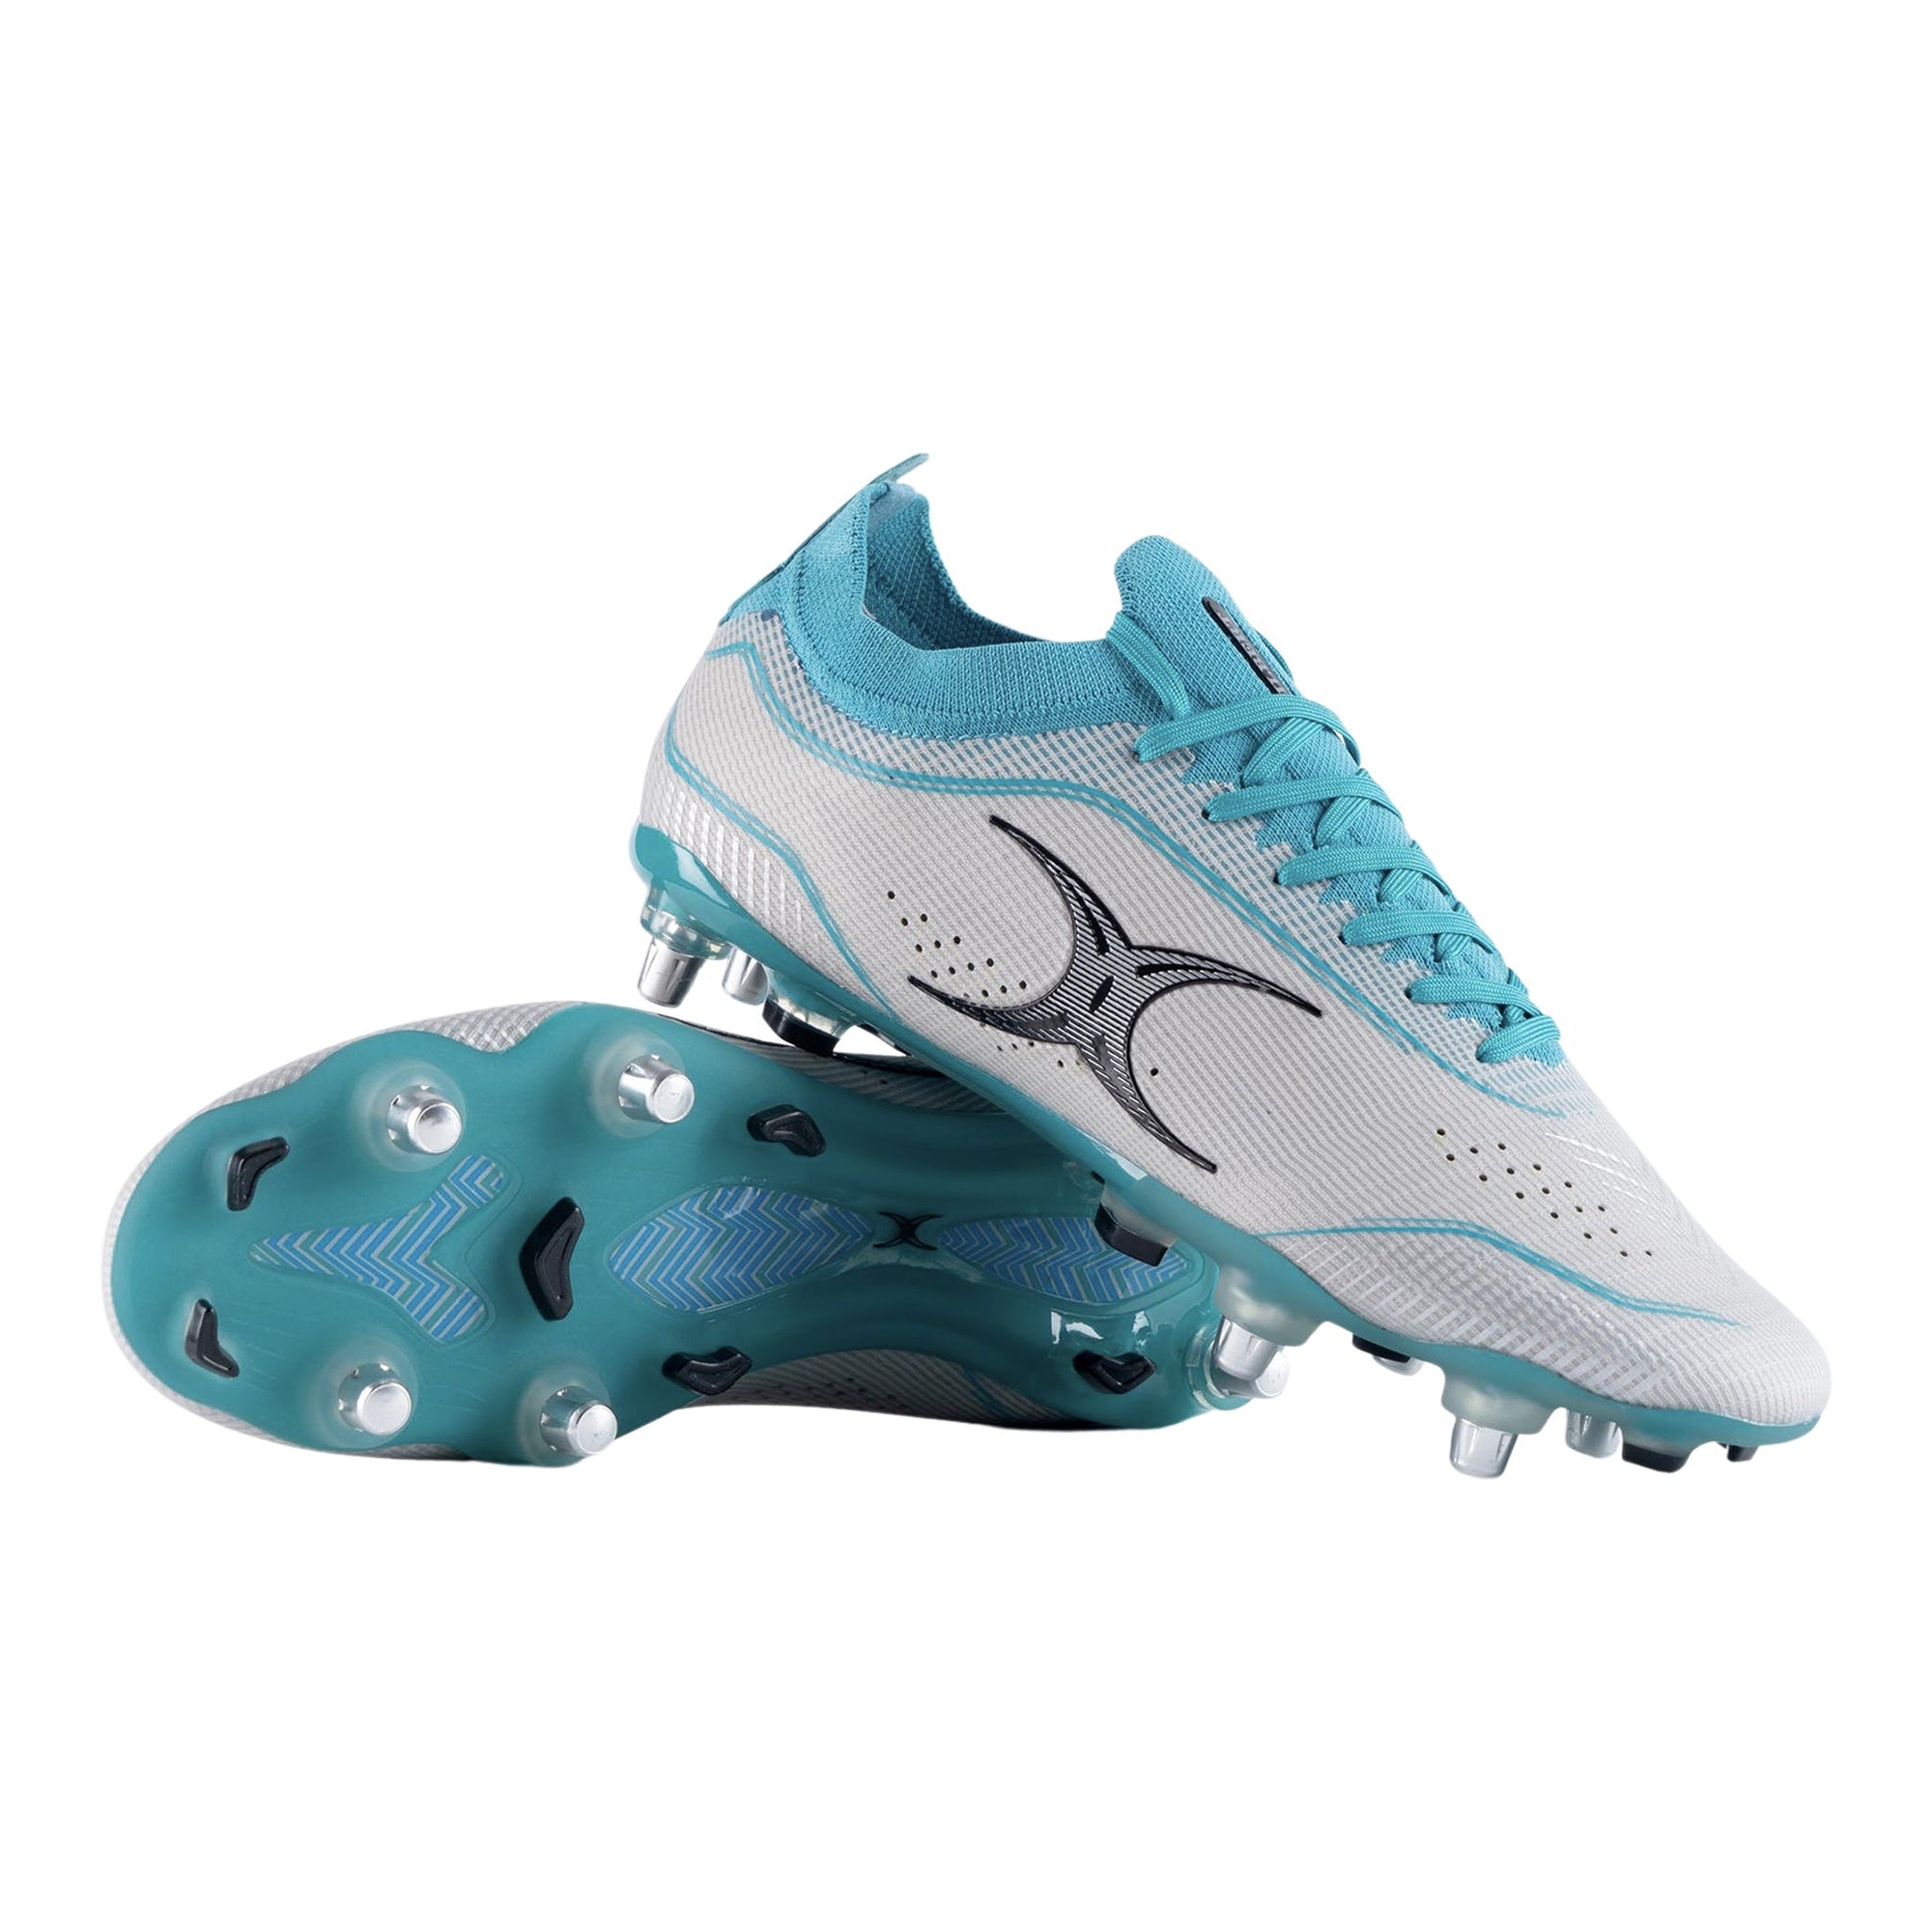 Rugby Footwear Tagged gilbert - Rugby Imports